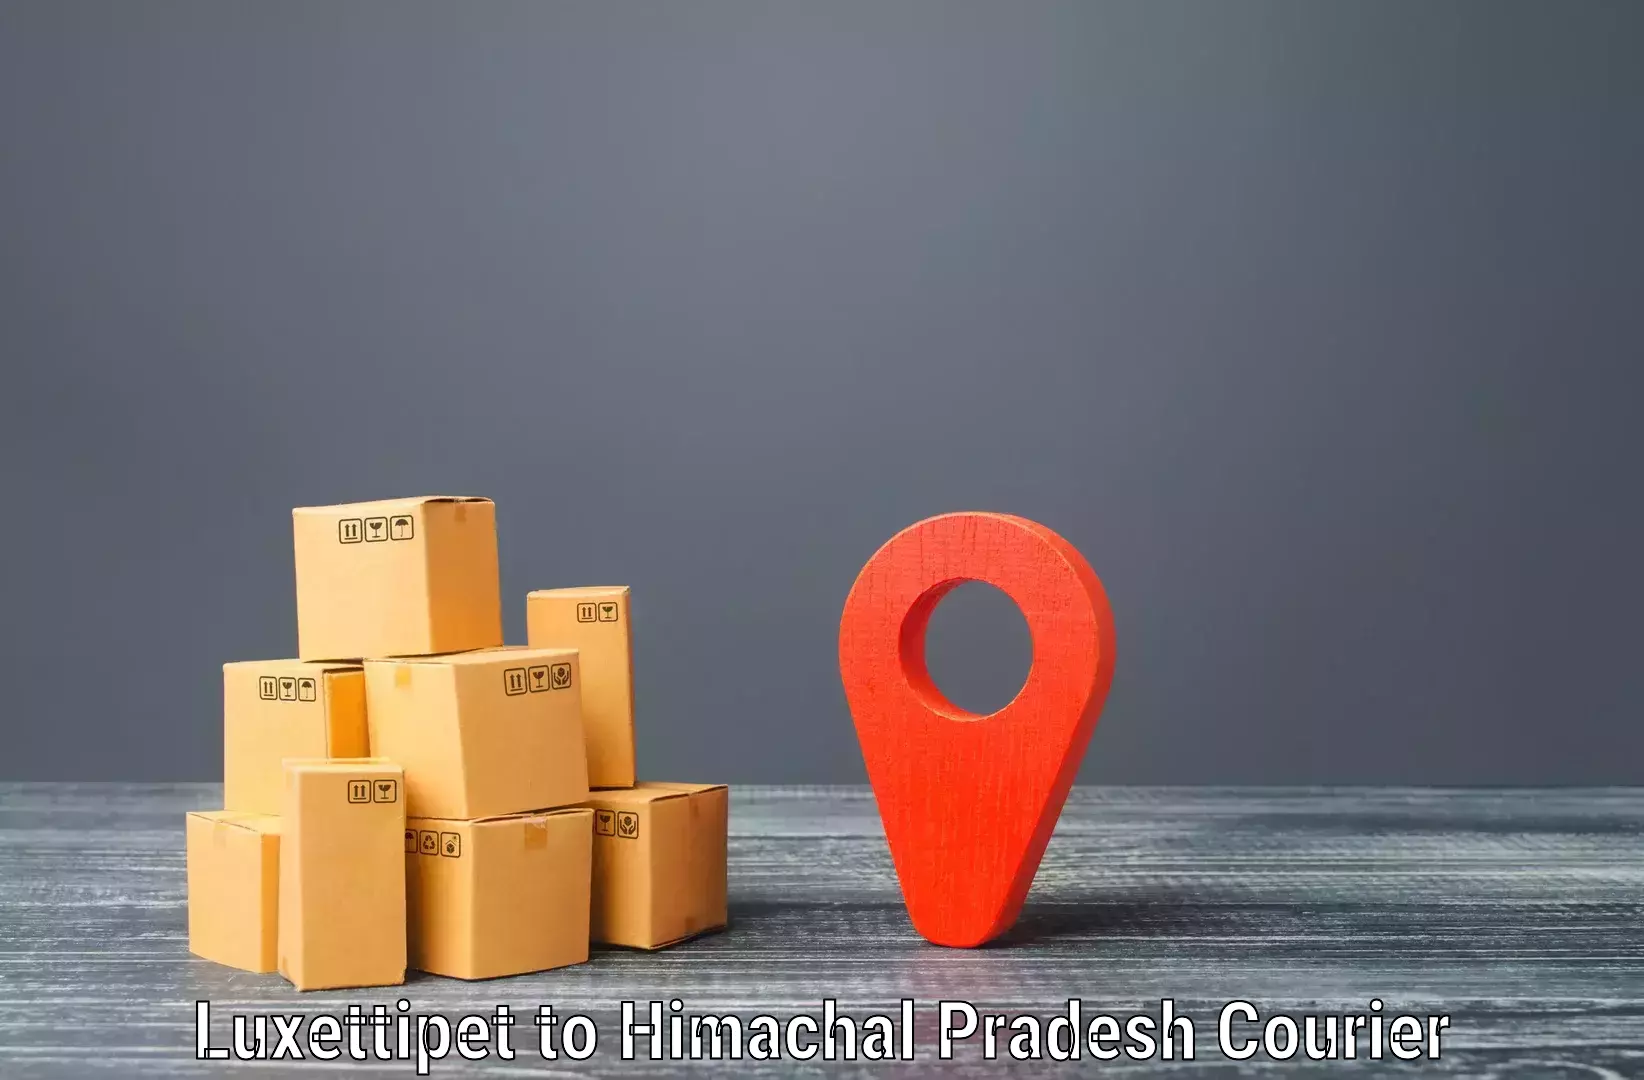 Professional courier handling Luxettipet to Dharamshala